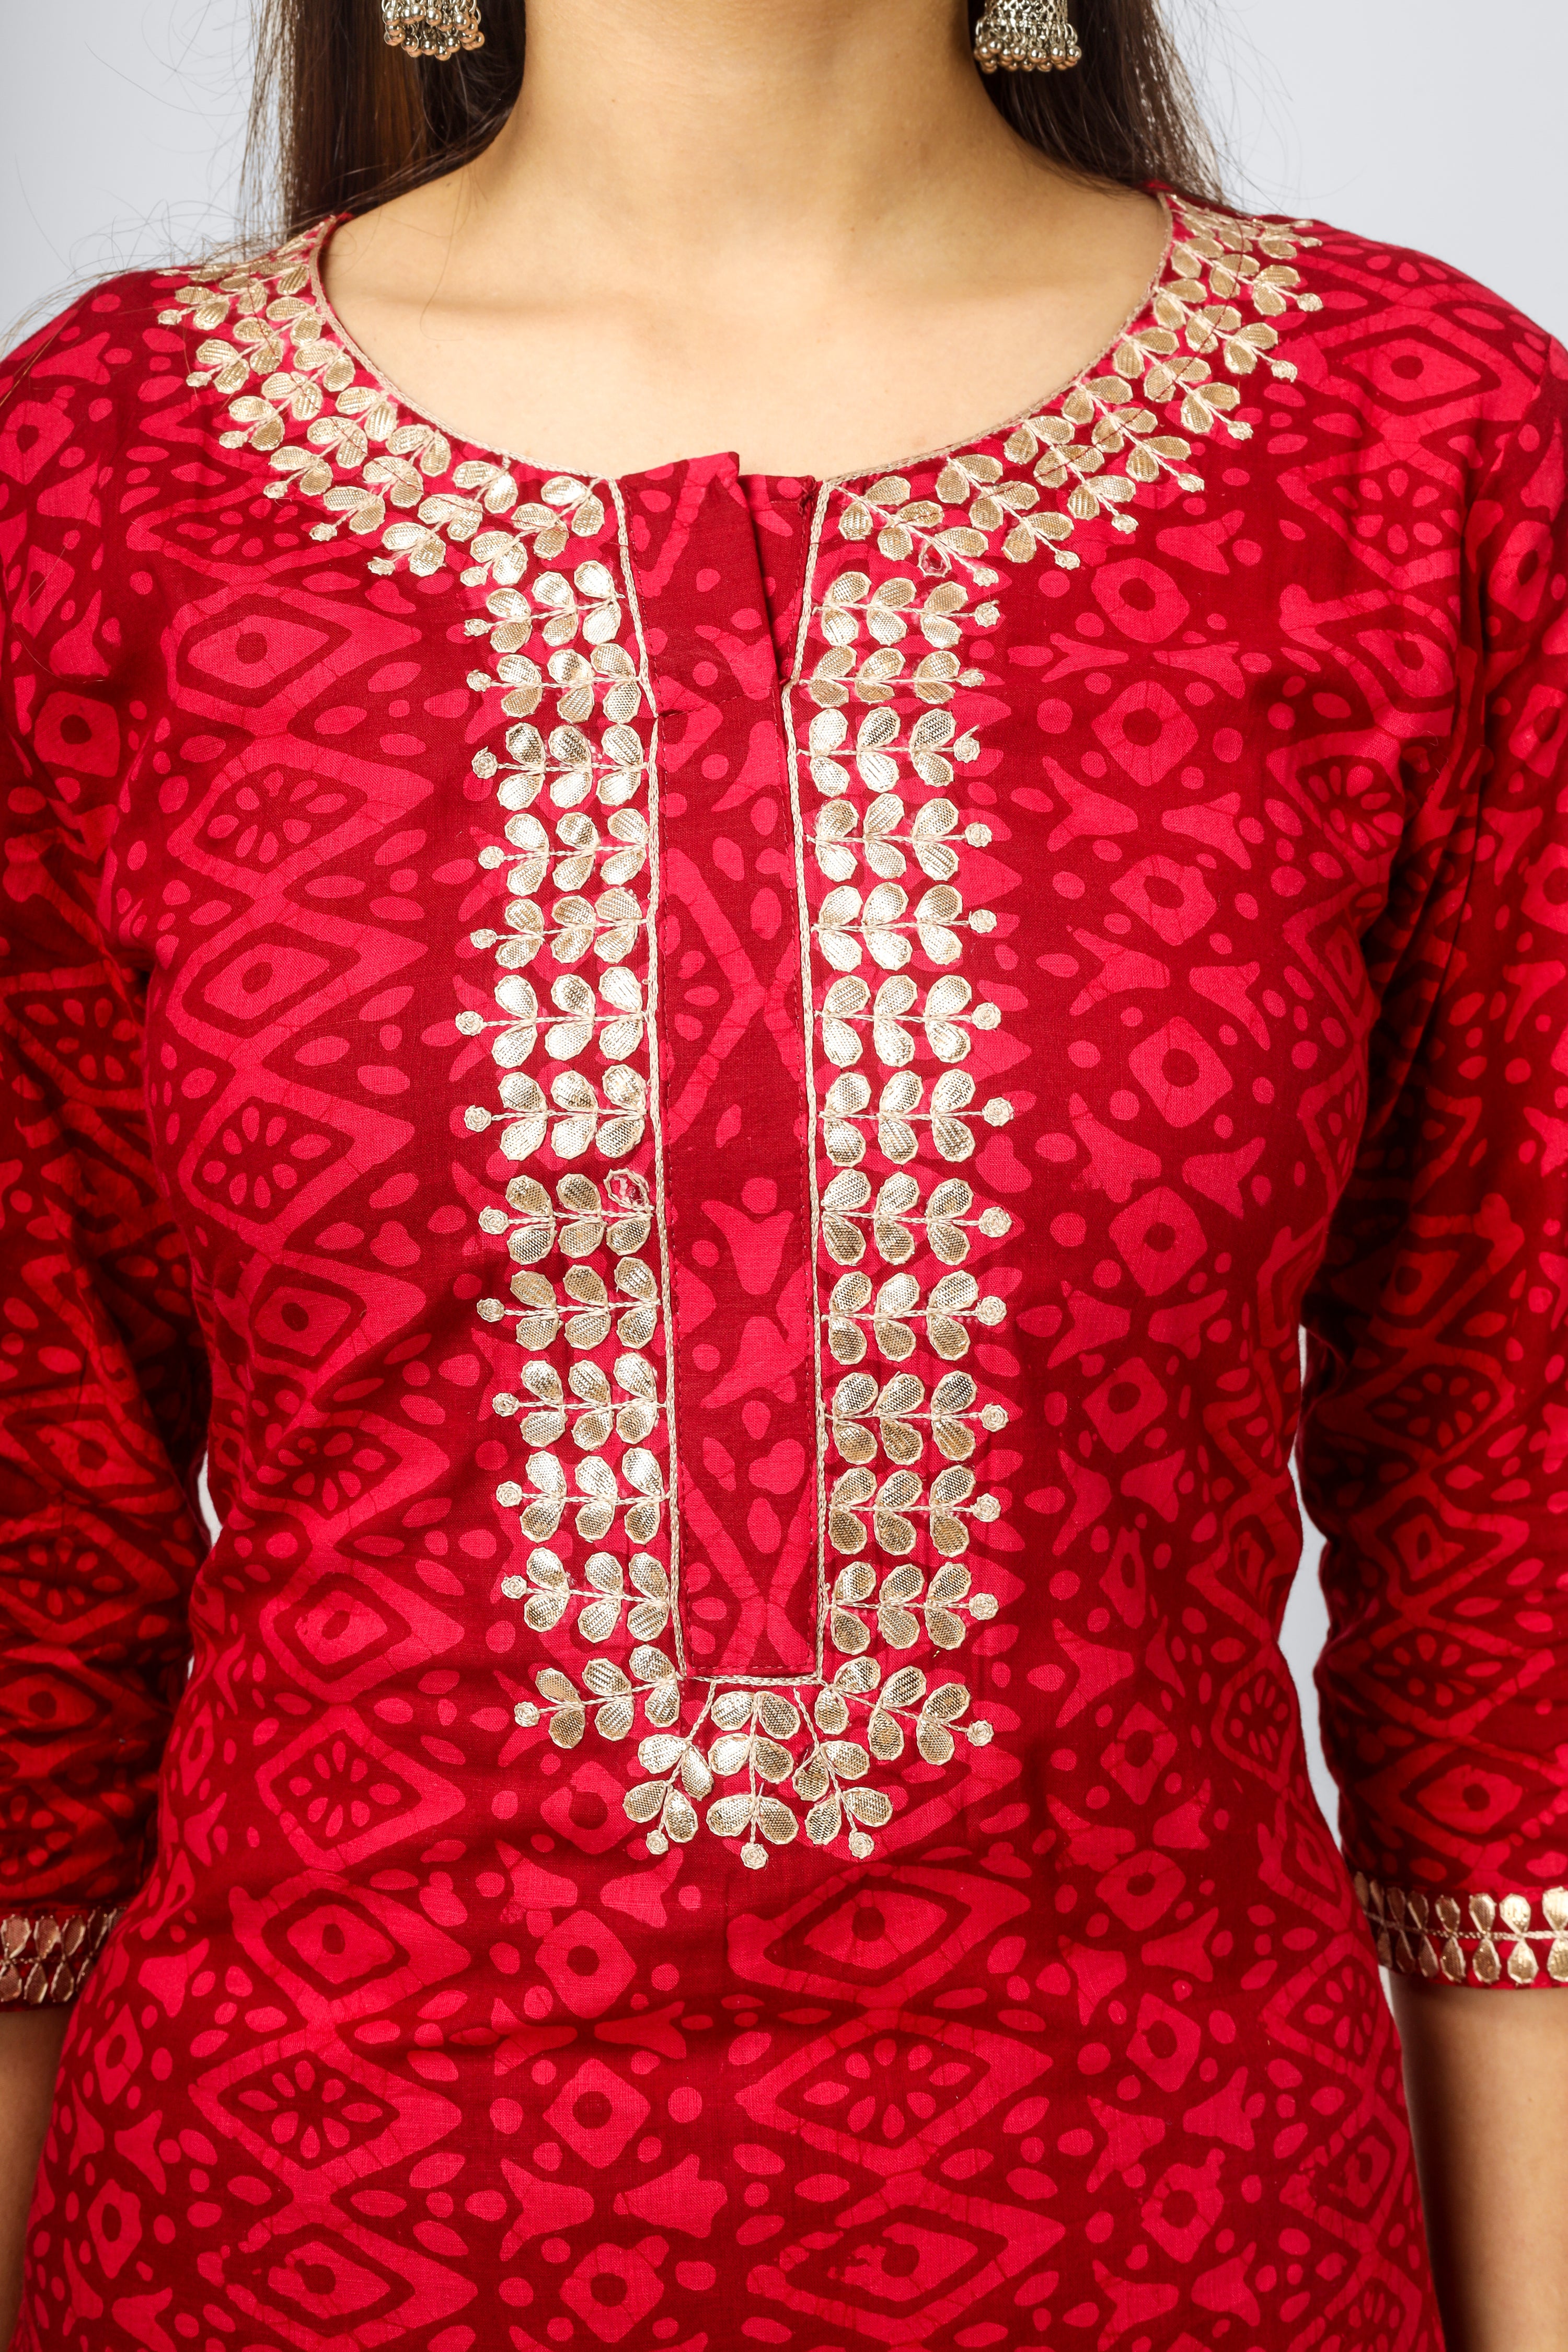 Women's Premium Red Kurti with Pant For Casual Wedding Wear Gift Item | eBay